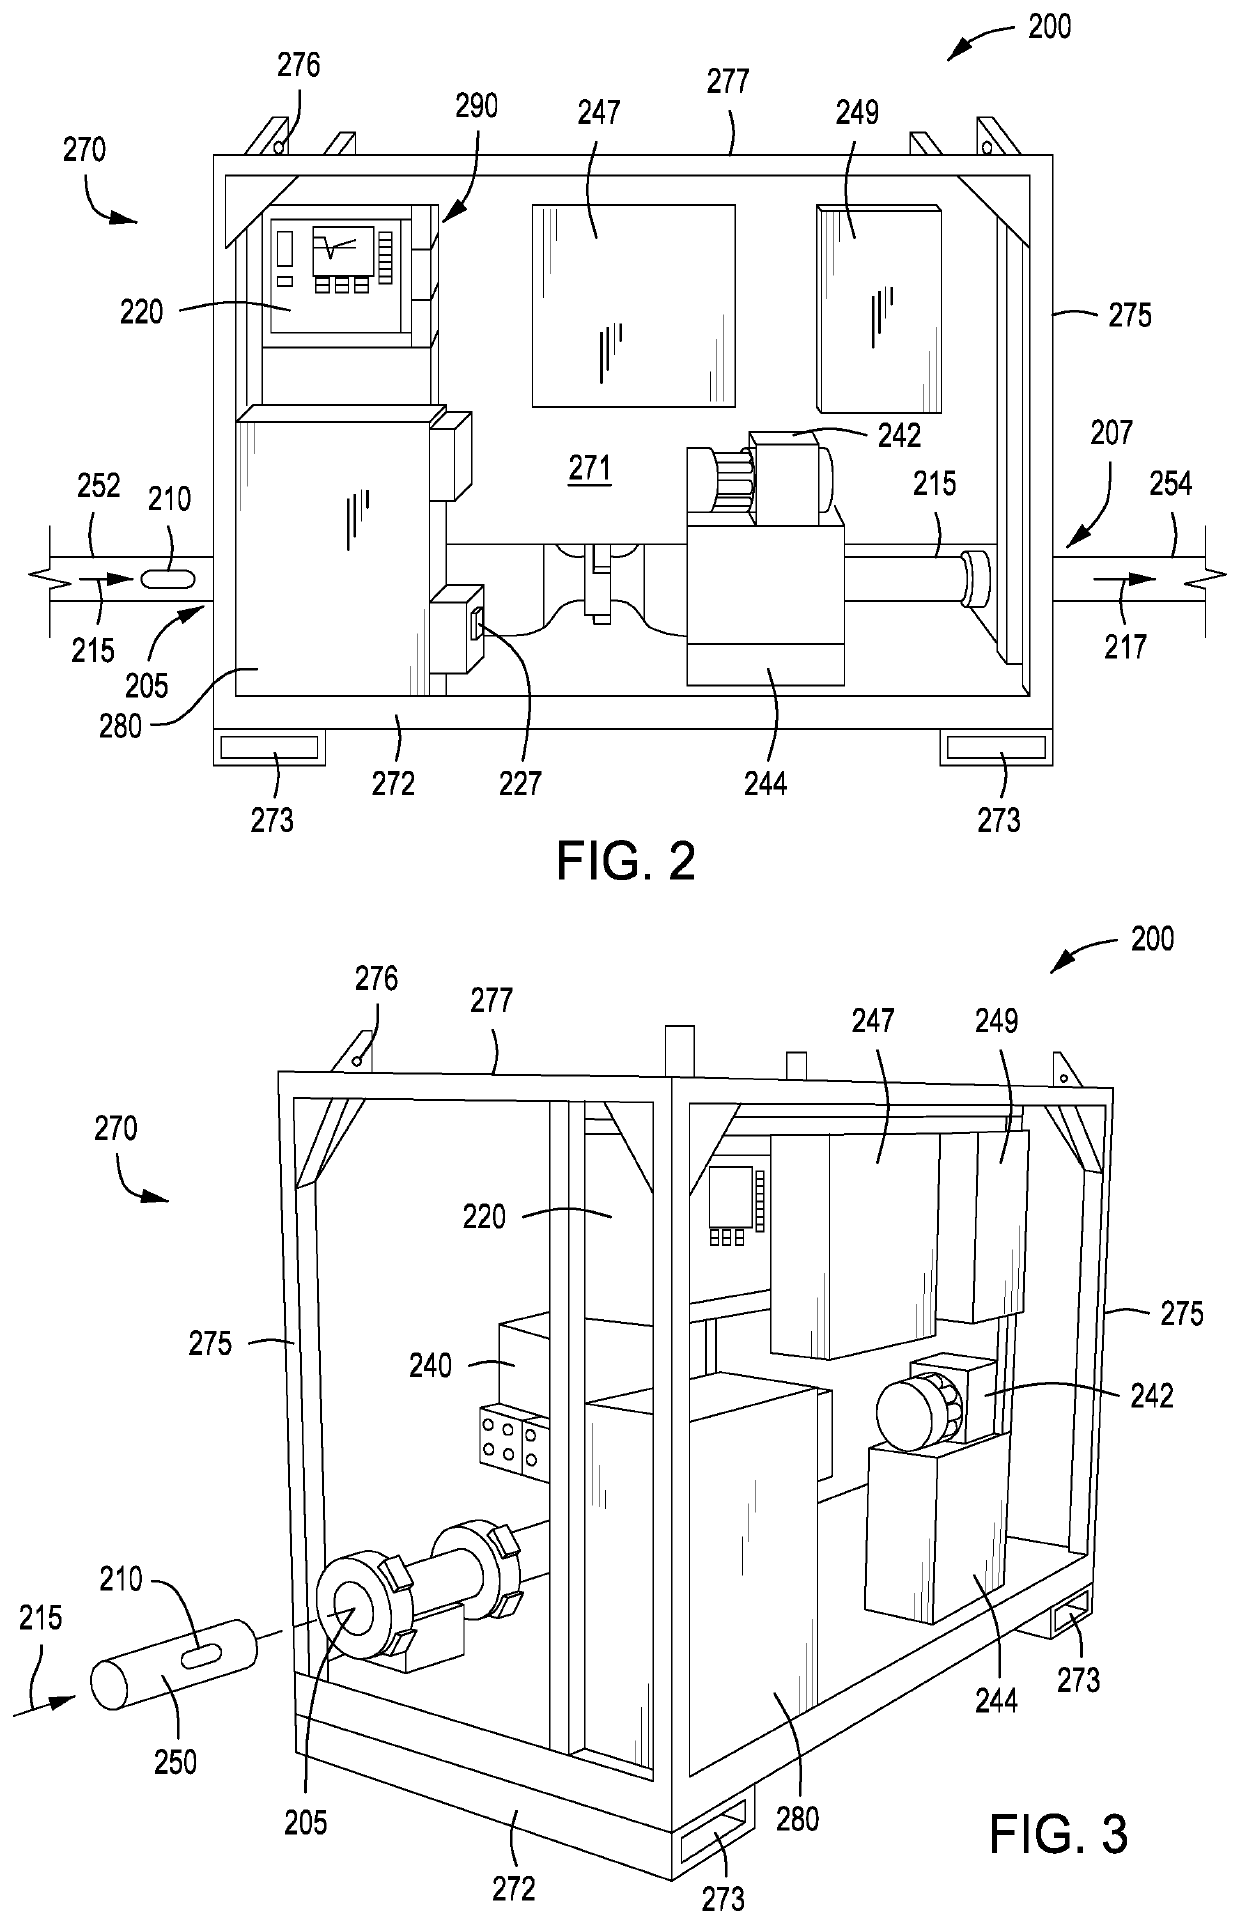 Method of servicing an electronically controlled PRV system